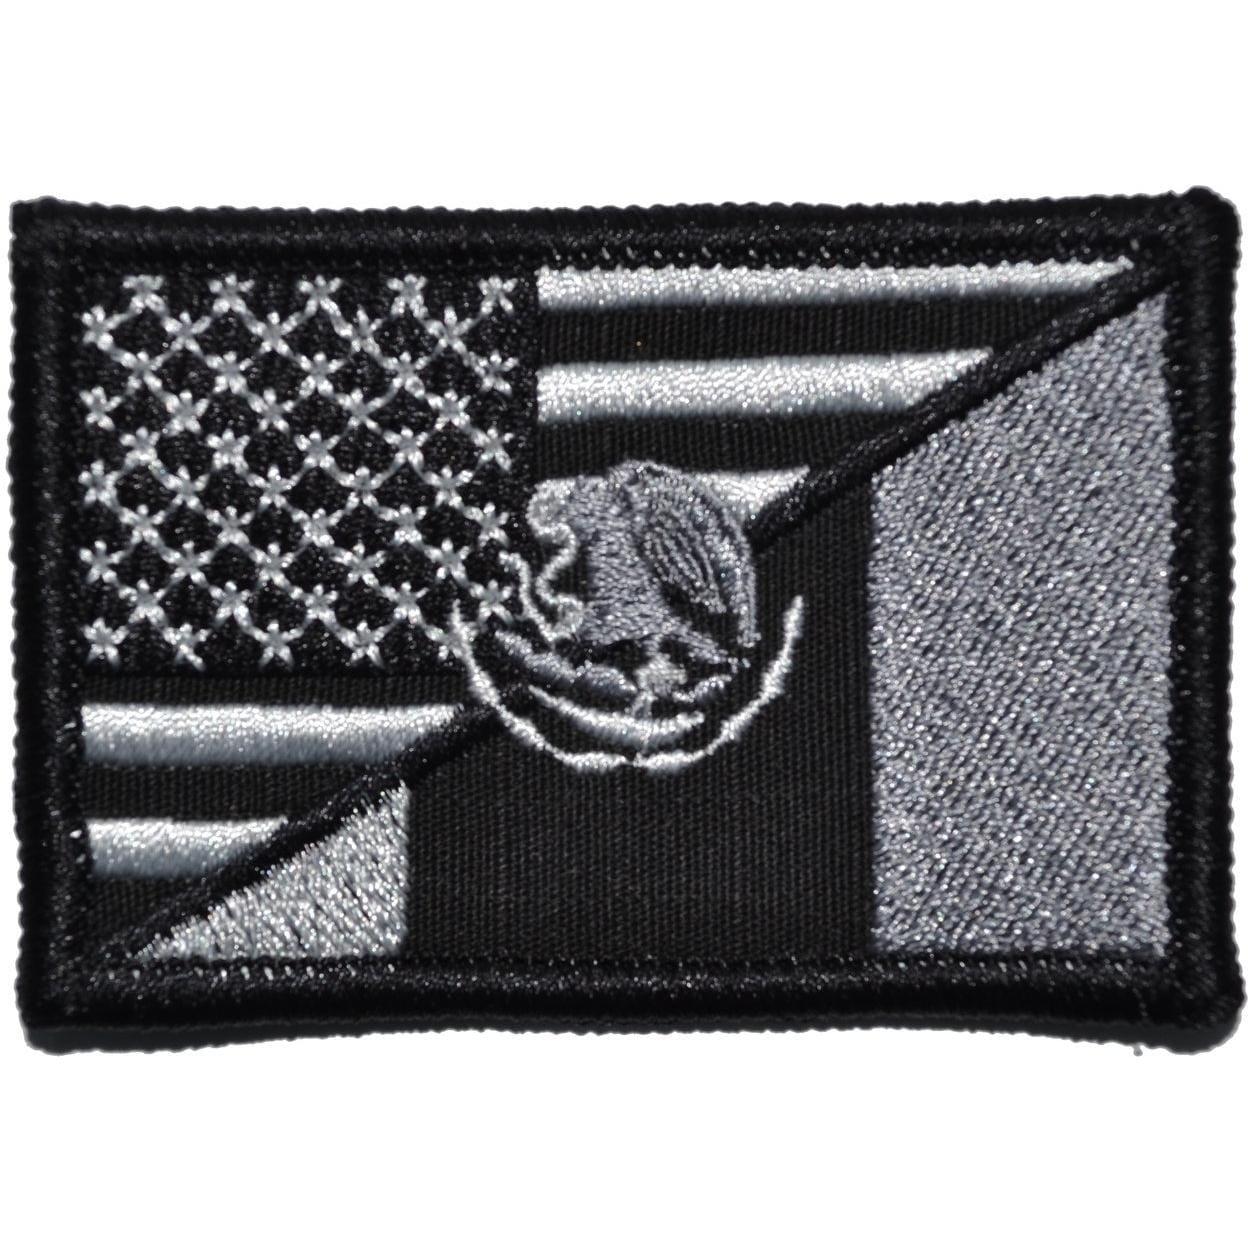 JBCD Mexico Flag Patch Mexican Tactical Patch - PVC Rubber Hook & Loop  Fastener Patch (2 Pack)